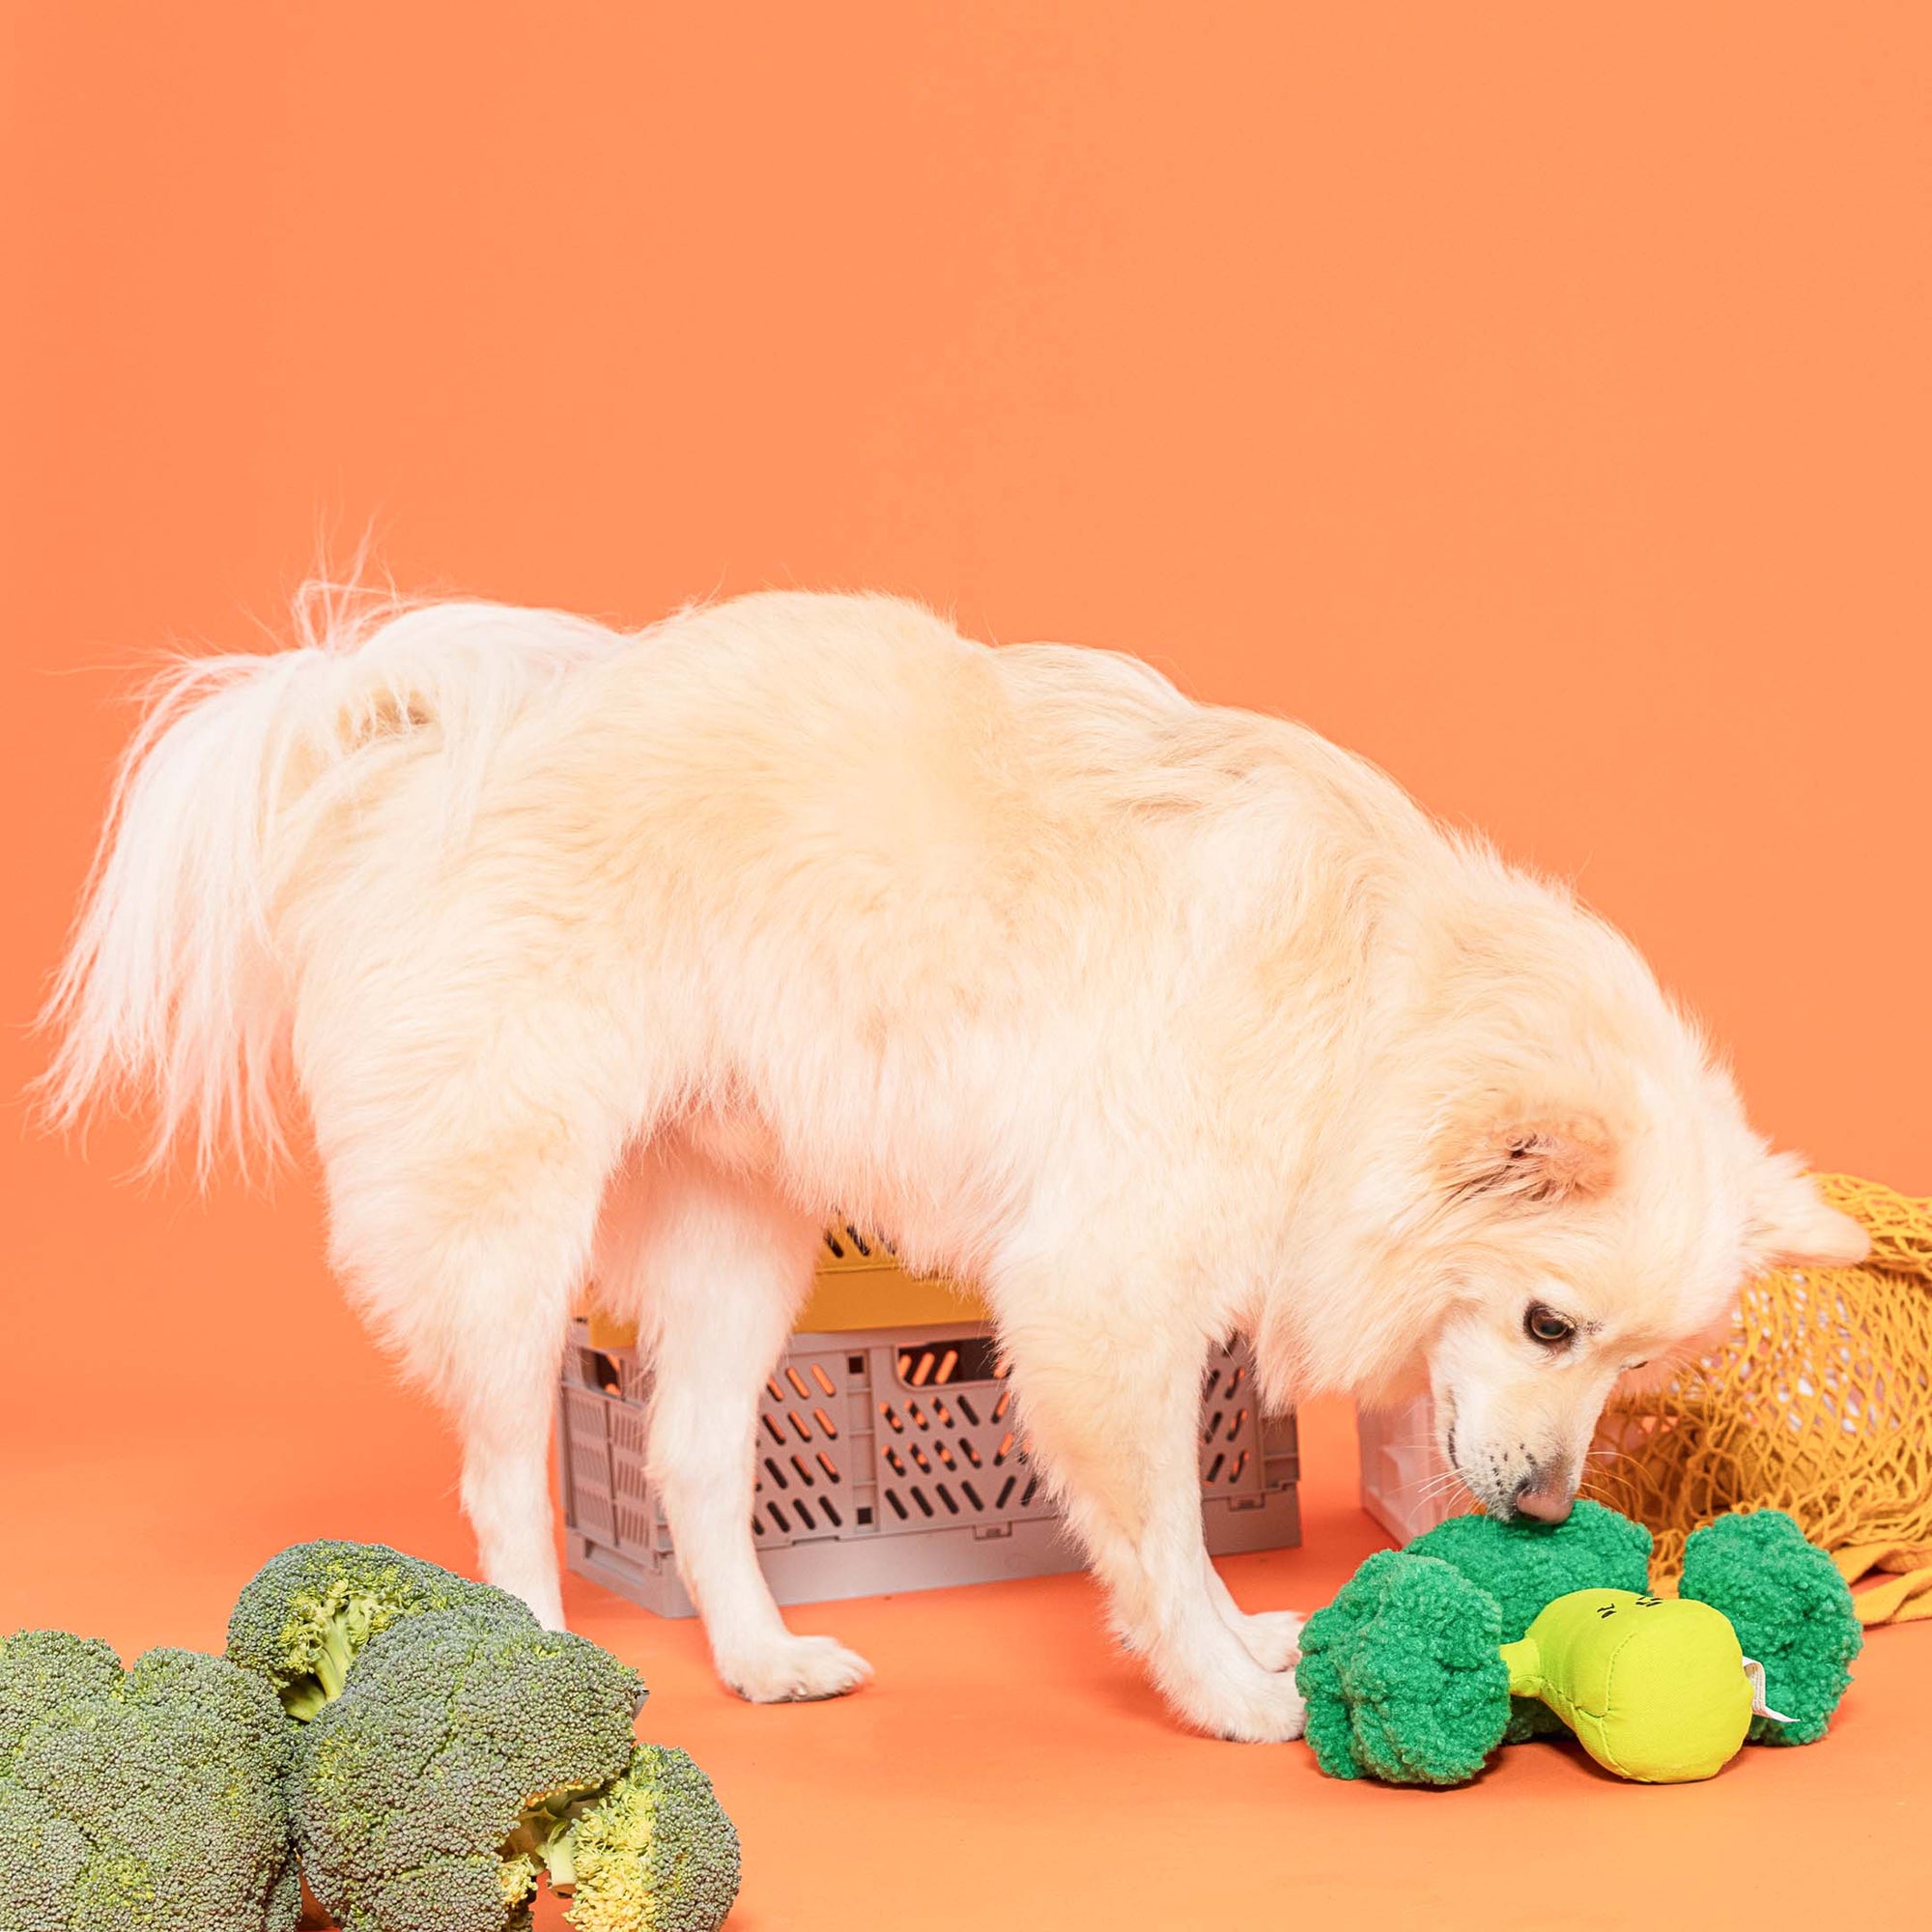 The image shows a light-colored dog with a plush broccoli-shaped nosework toy and actual broccoli heads against an orange background. The toy and real vegetables serve as a playful and educational contrast, engaging the dog's natural sniffing behavior. The setup is likely designed to stimulate the dog's senses and provide mental enrichment through scent discrimination games.